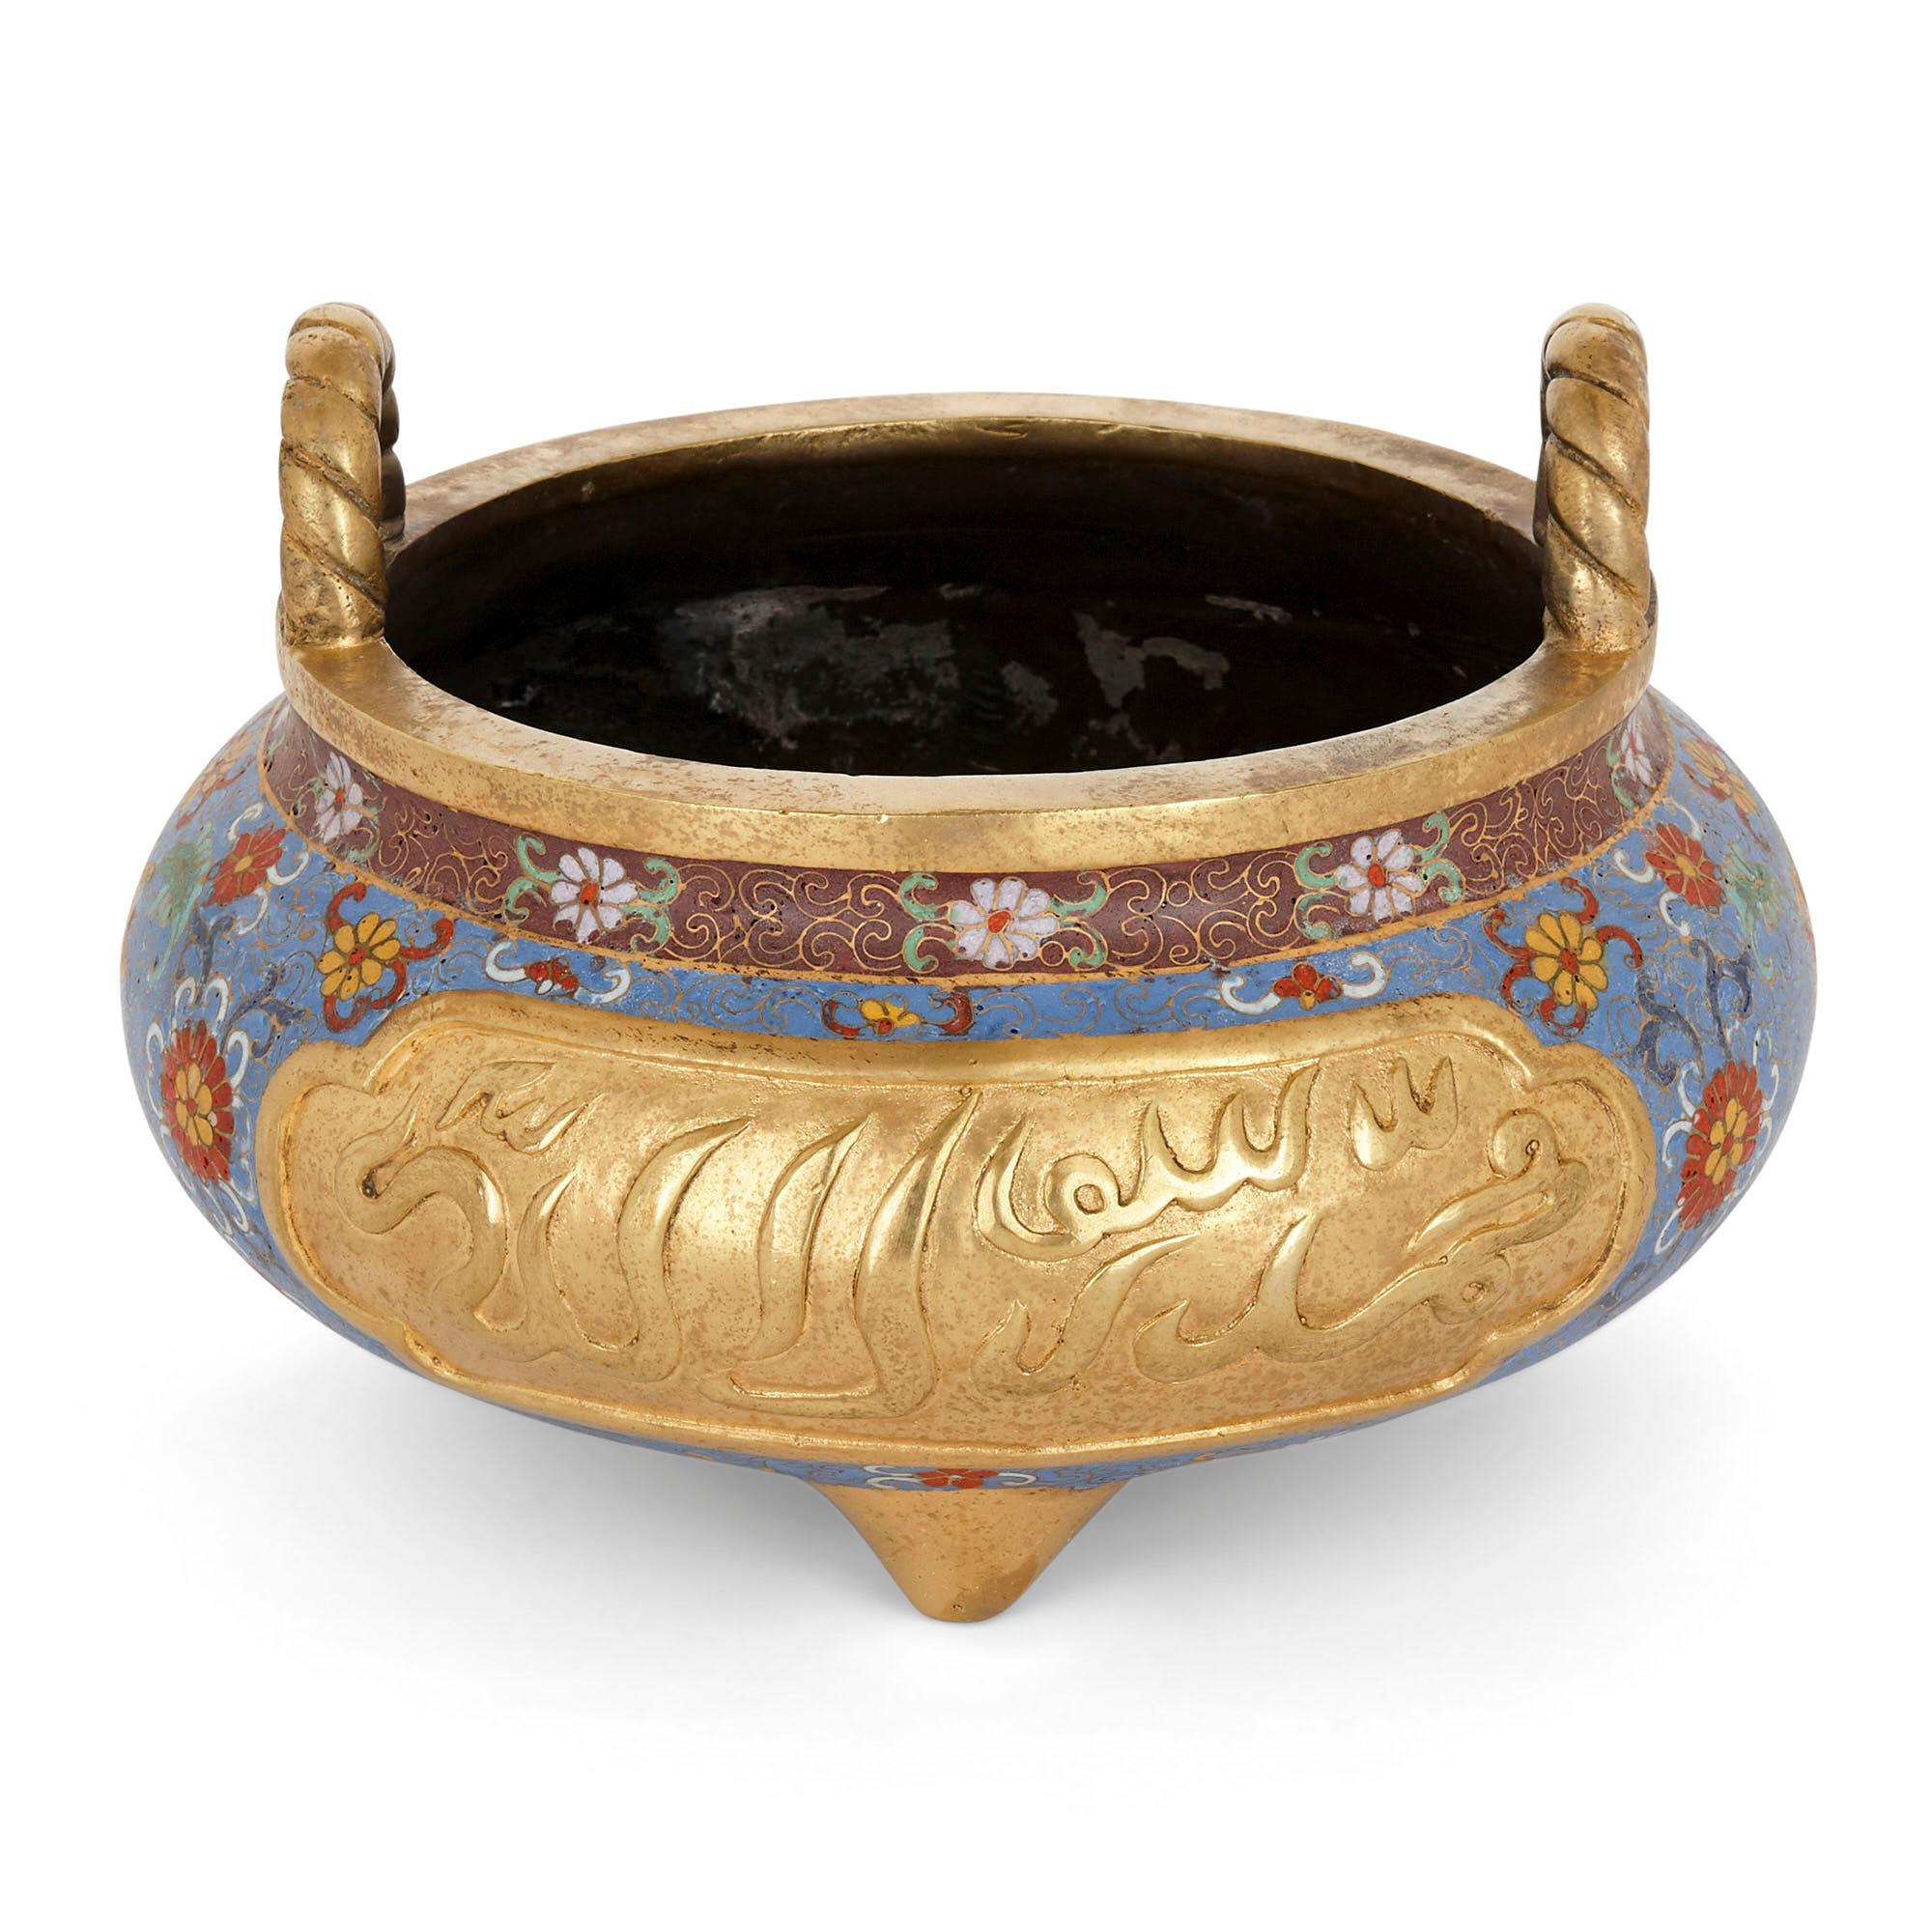 Chinese Ormolu and cloisonné enamel vase for the Islamic Market
Chinese, early 20th century
Dimensions: Height 18cm, diameter 25cm

Crafted in China, this fine ormolu and cloisonné enamel bowl was intended for export to Islamic markets. Sitting